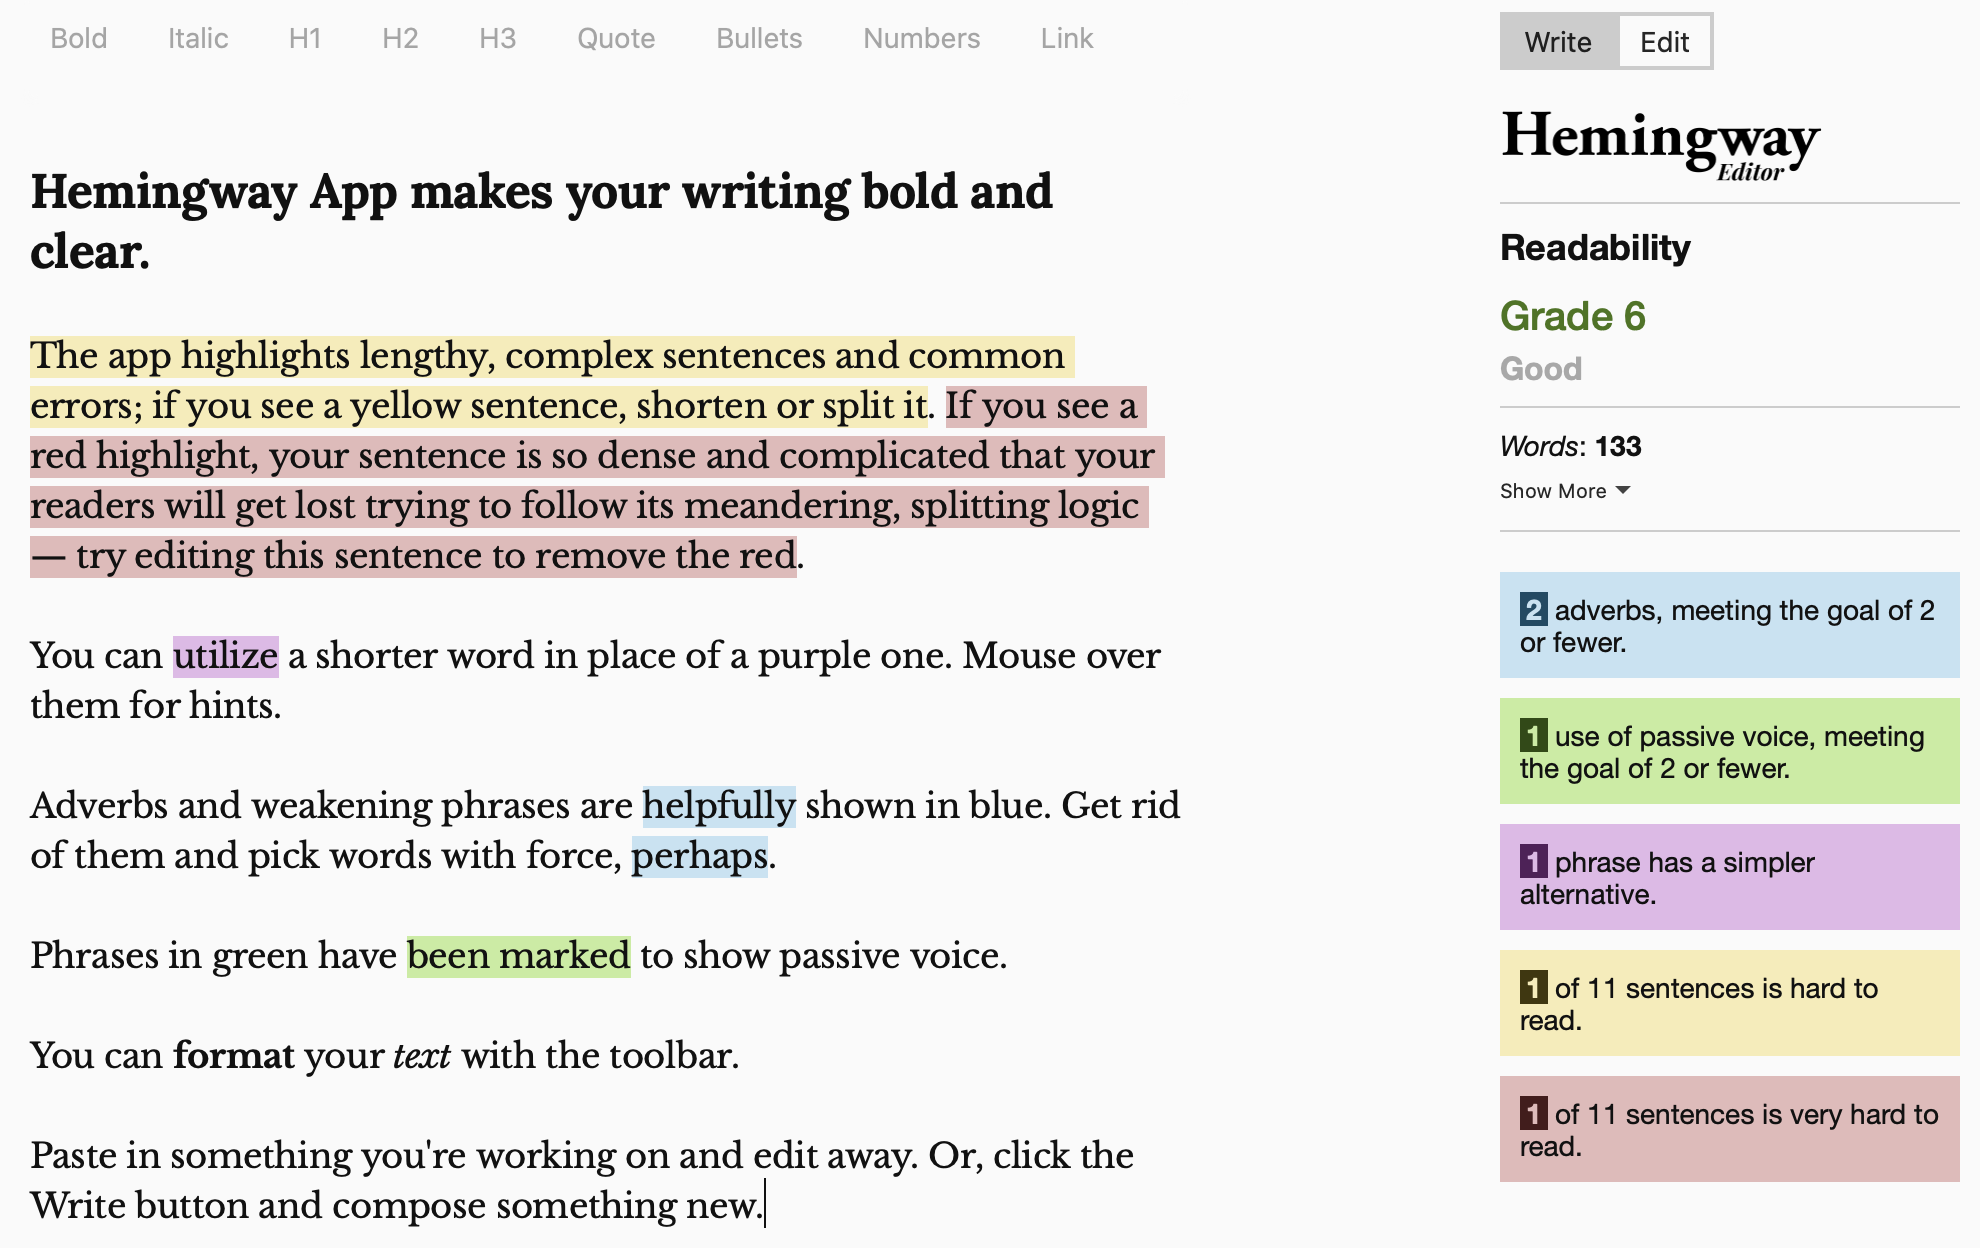 Hemingway app for making your writing concise